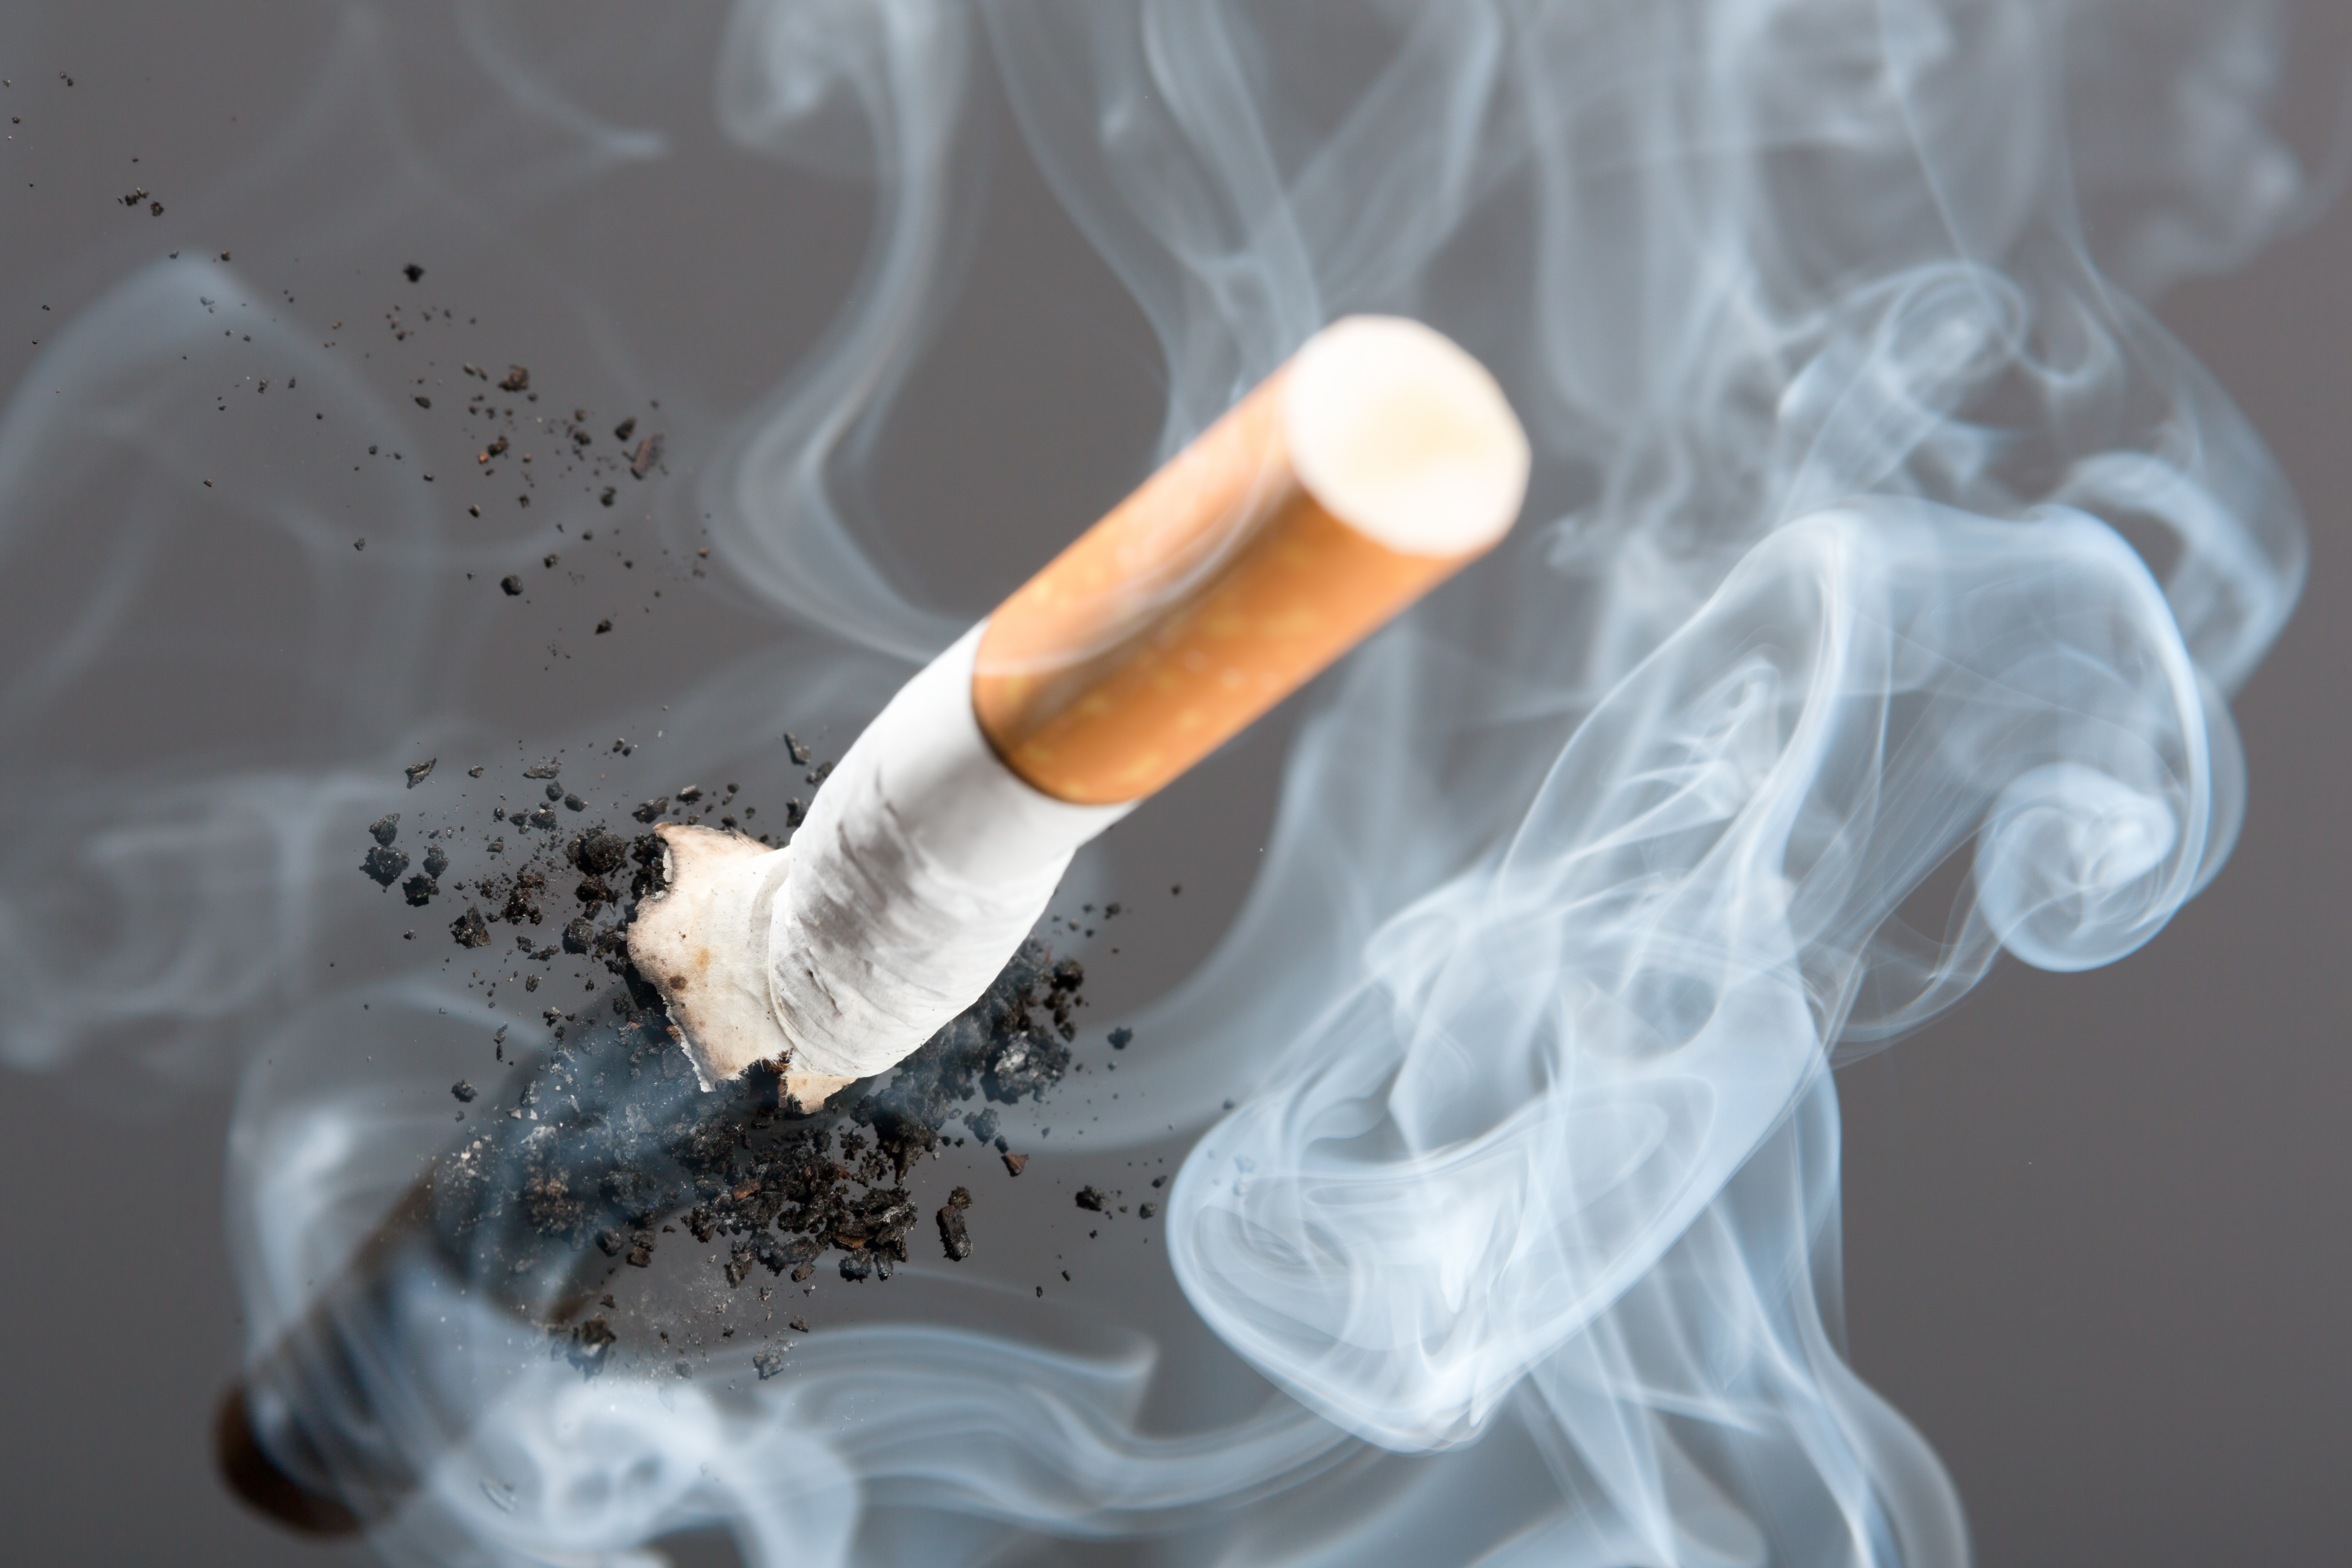 NYC Treats Tobacco Project Calls Attention to Higher Smoking Rates Among Minorities